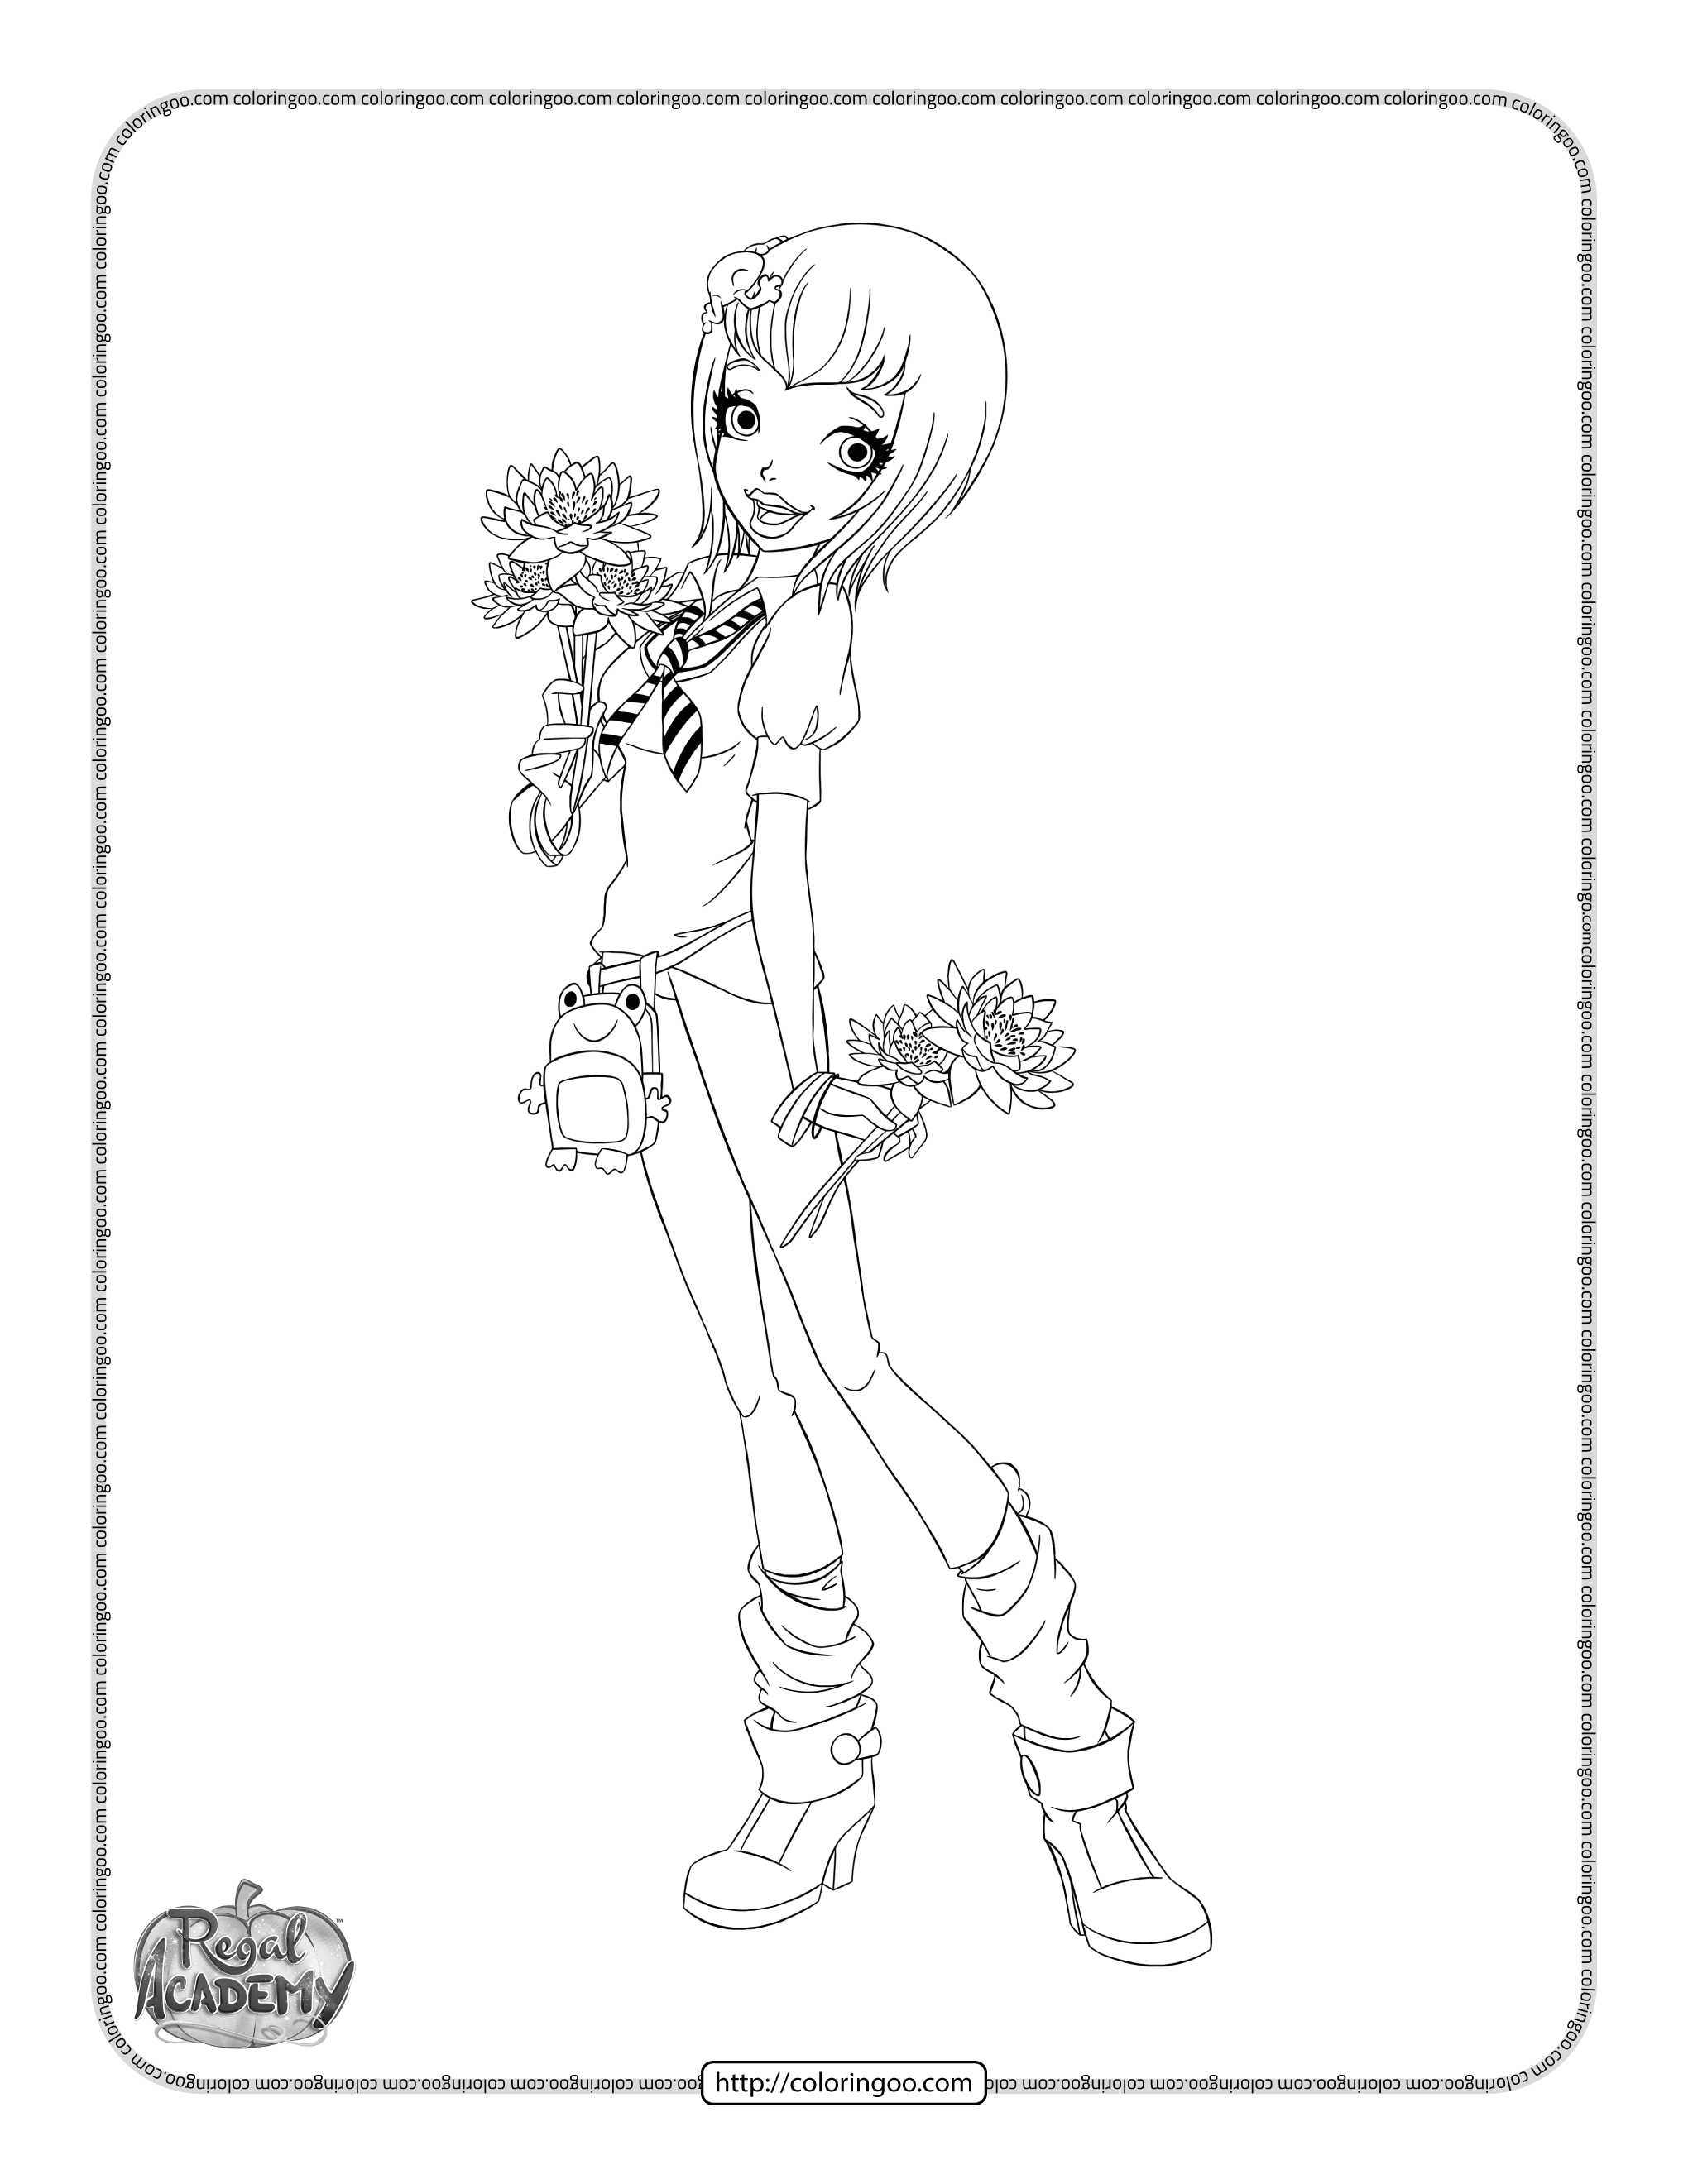 printable regal academy joy lefrog coloring pages